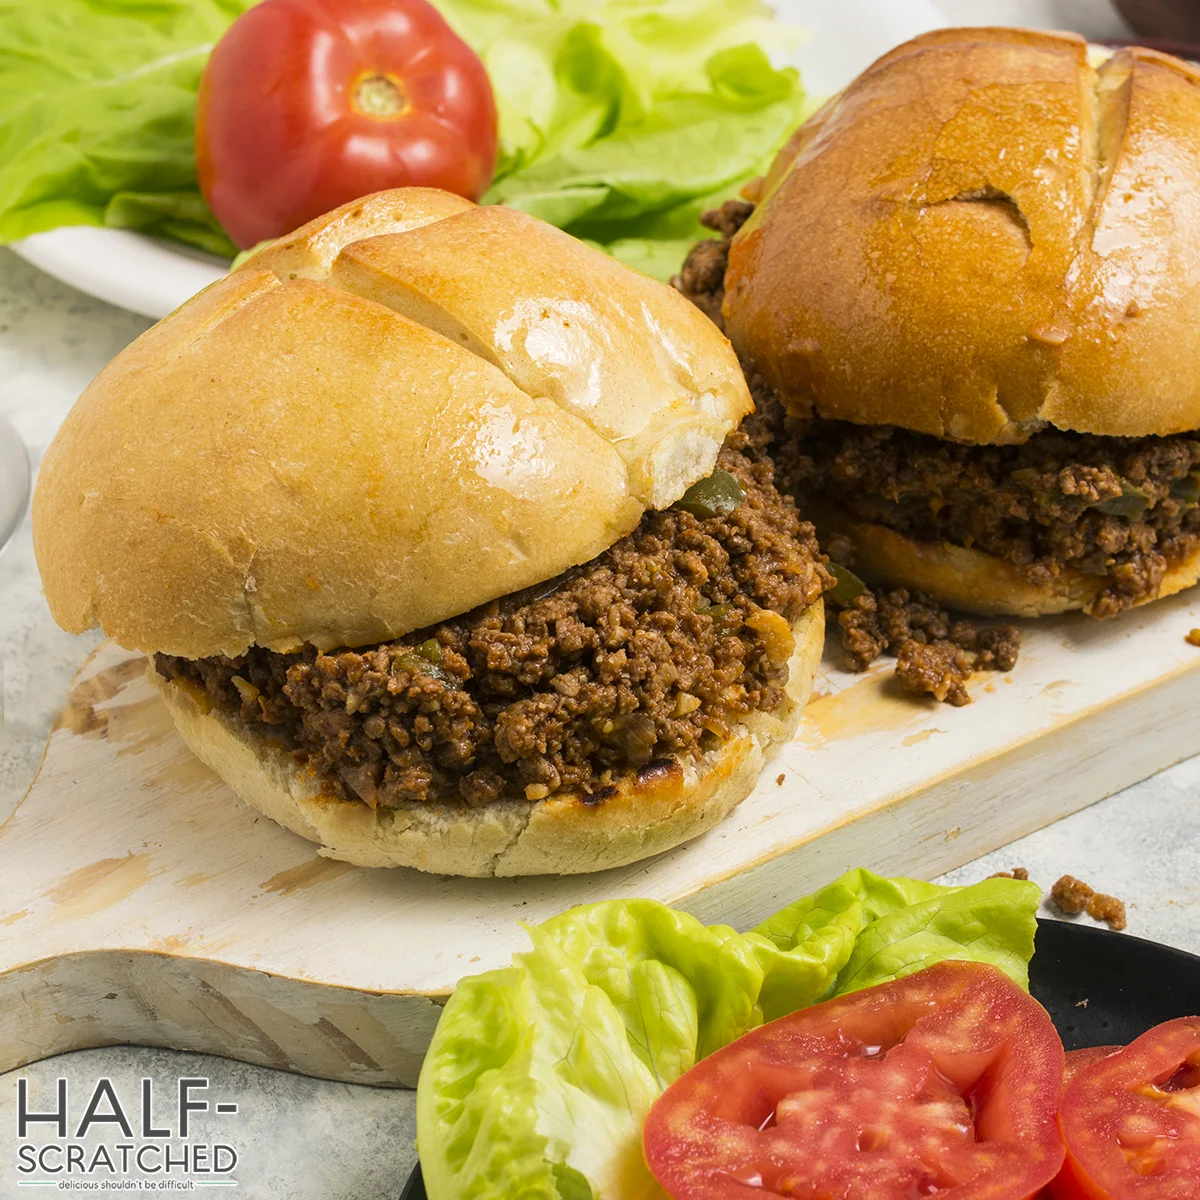 Sloppy Joe Sandwiches with Tomato and Lettuce